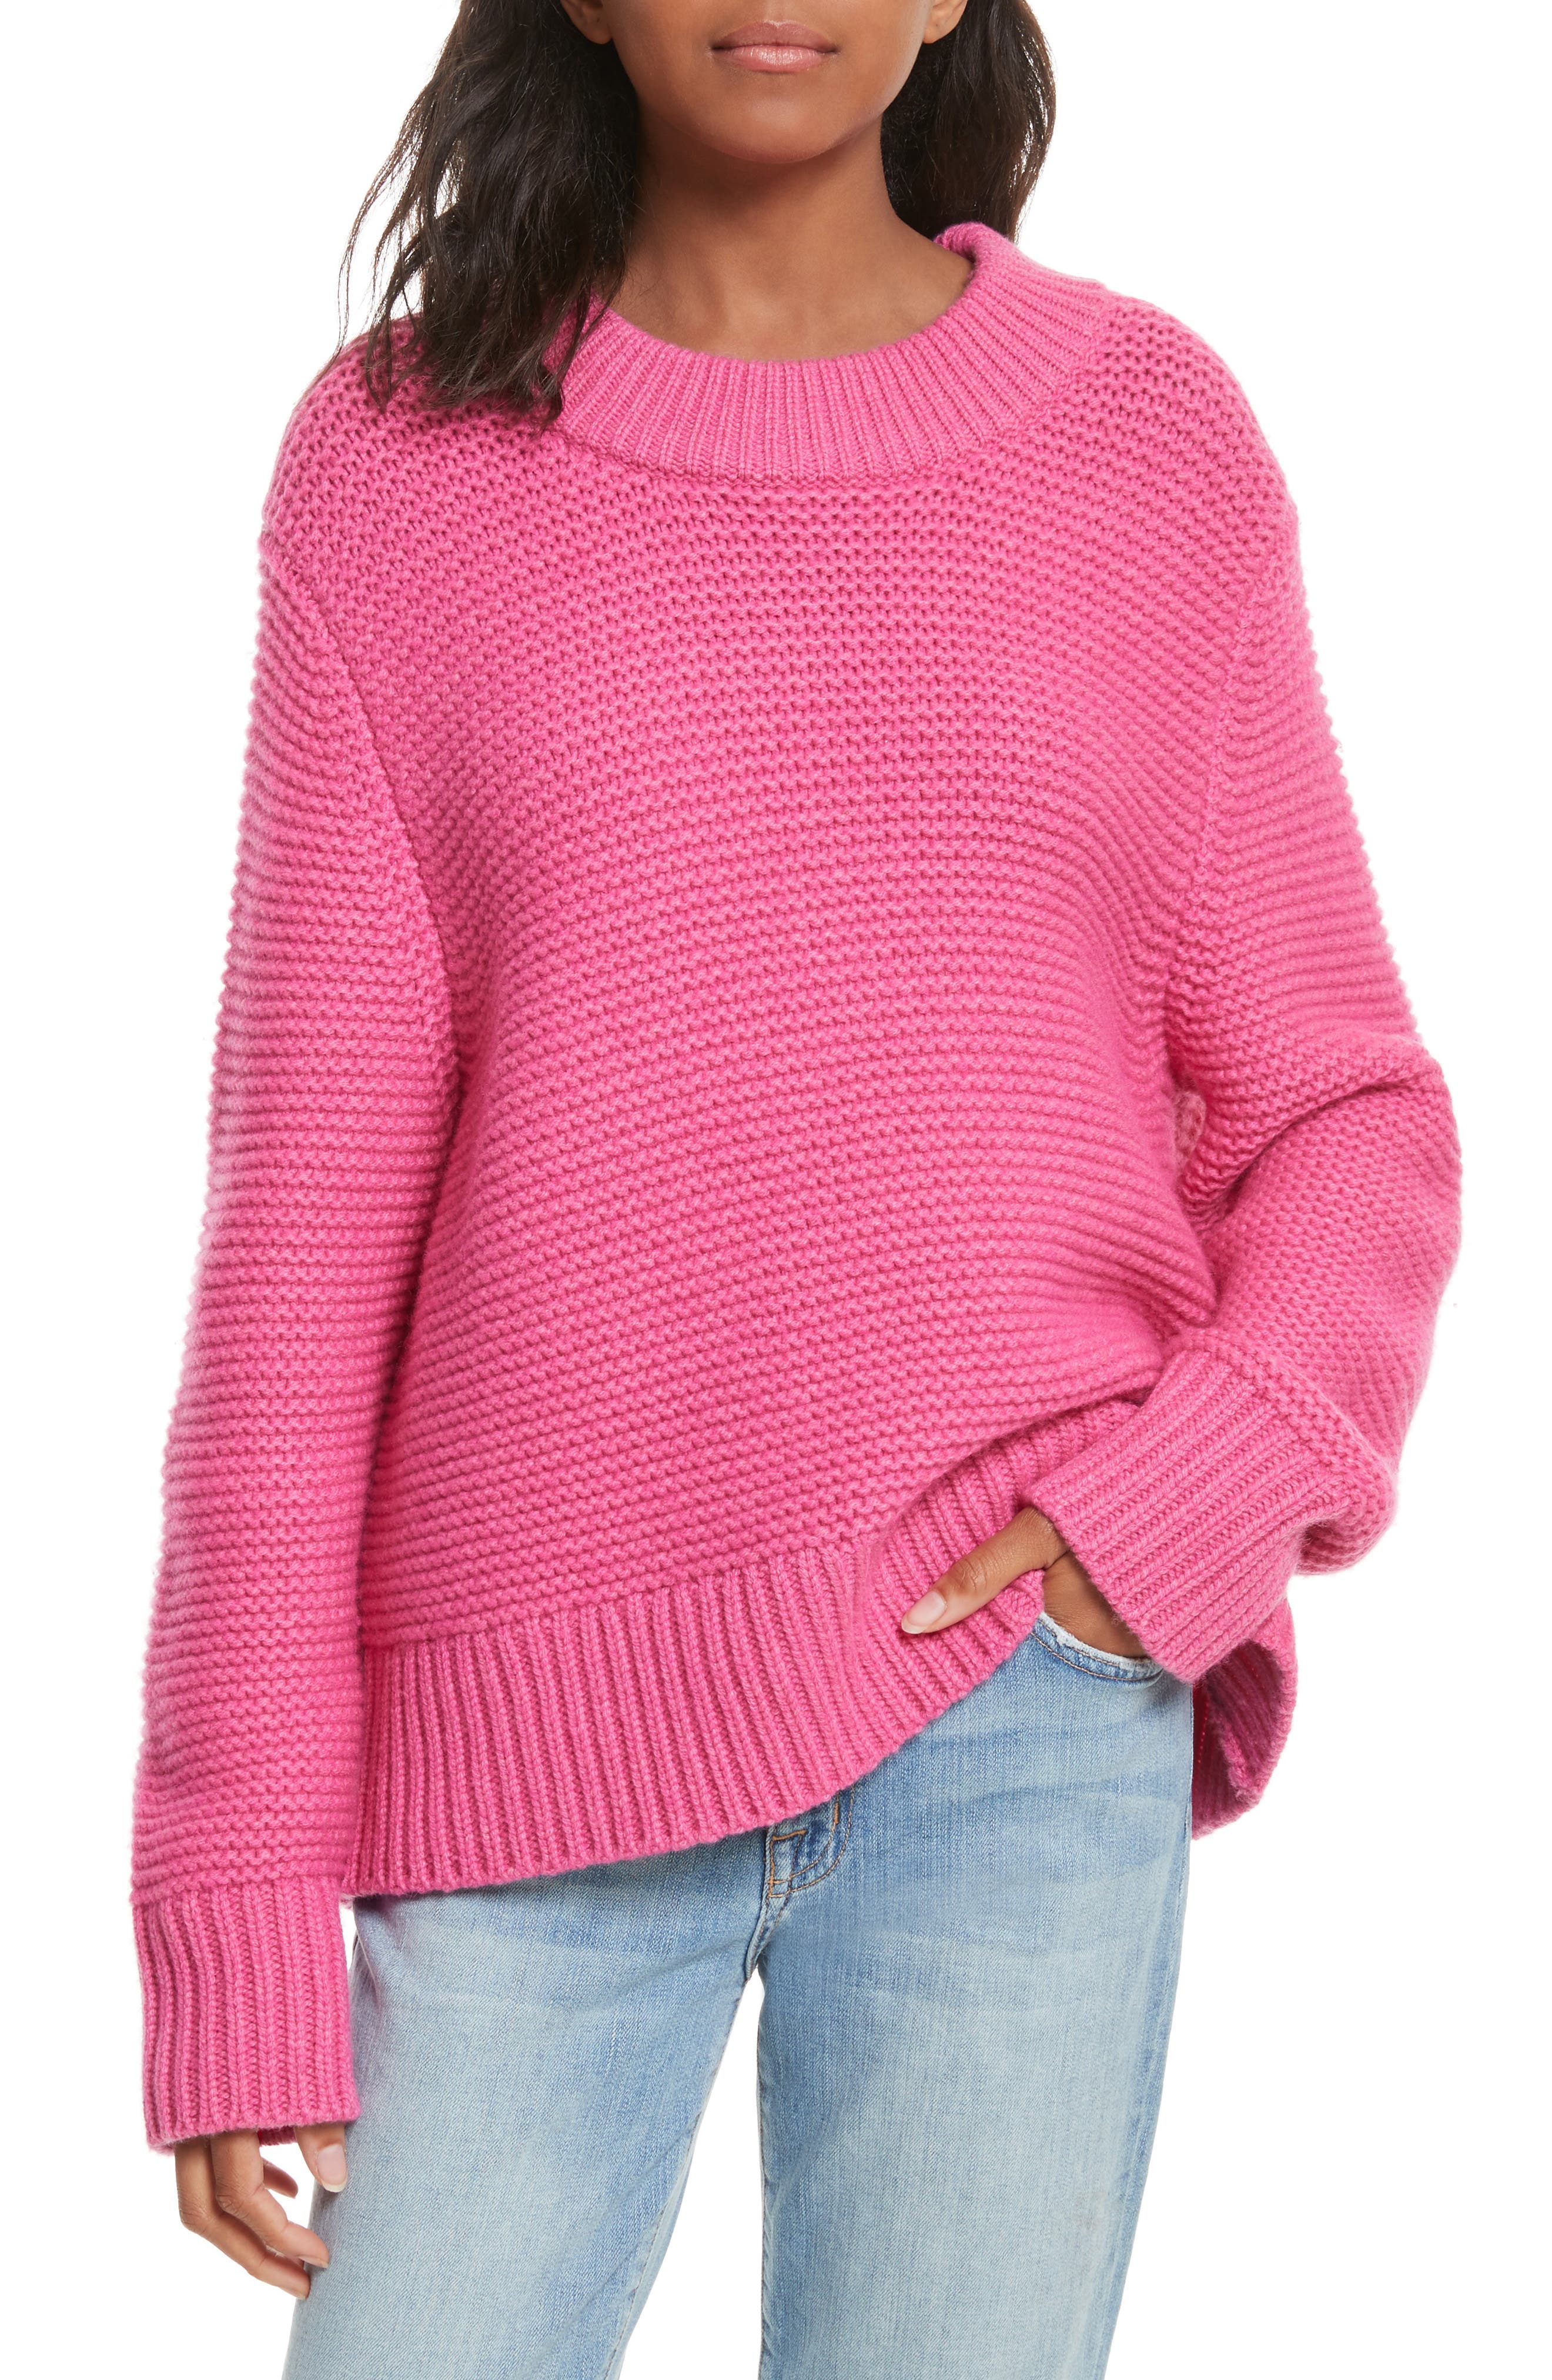 Women's Pink Cashmere Sweaters | Nordstrom